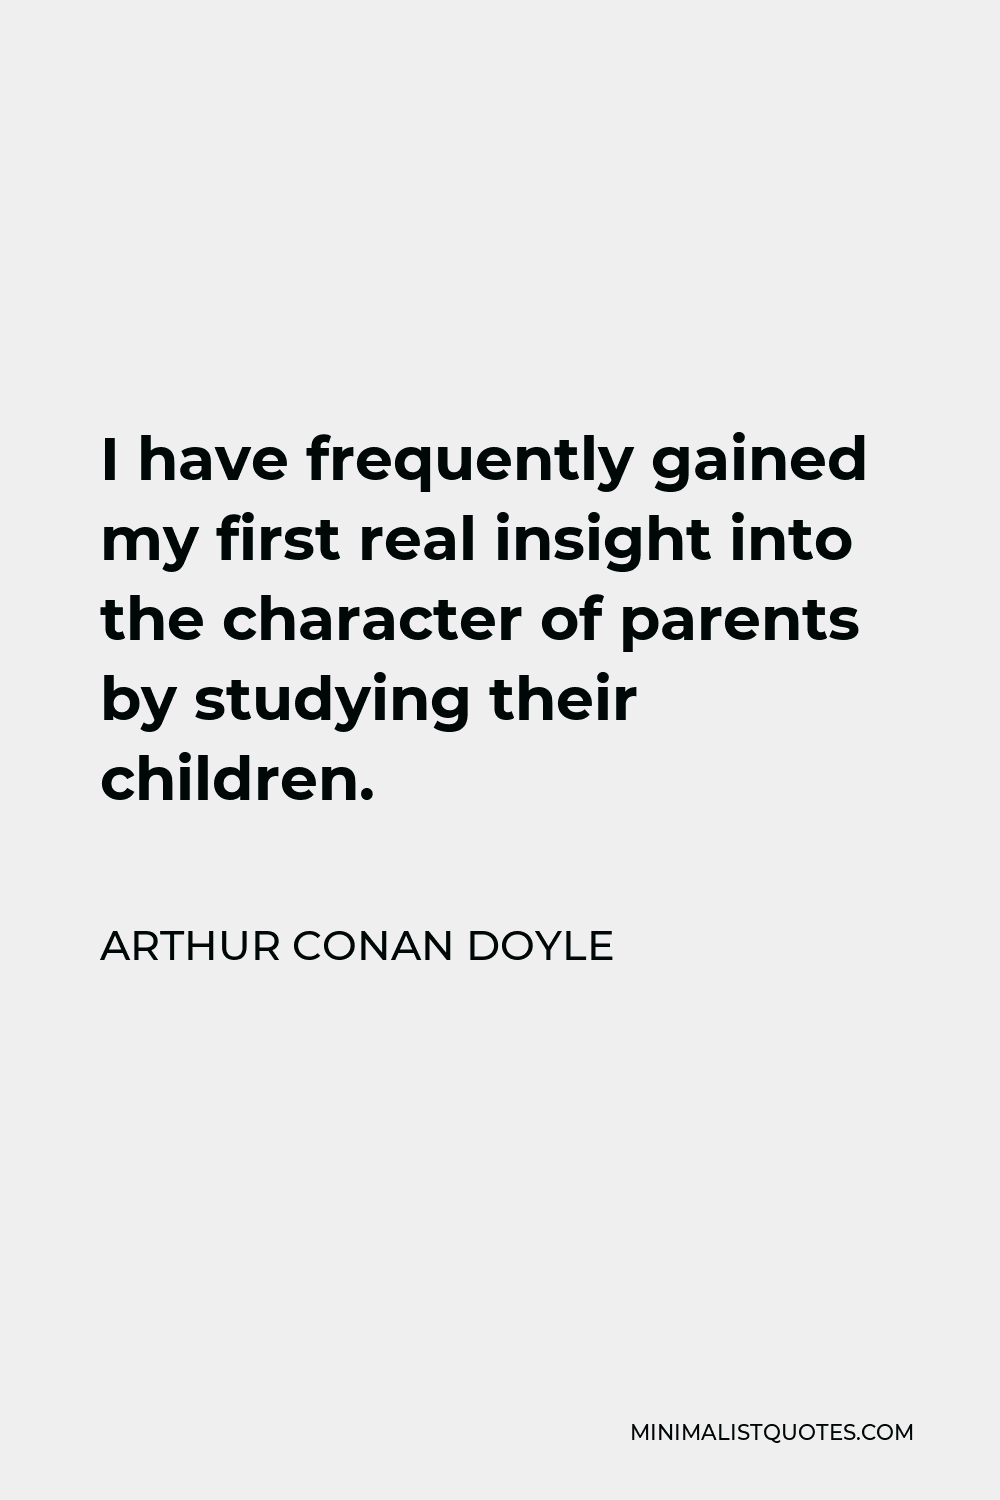 Arthur Conan Doyle Quote - I have frequently gained my first real insight into the character of parents by studying their children.